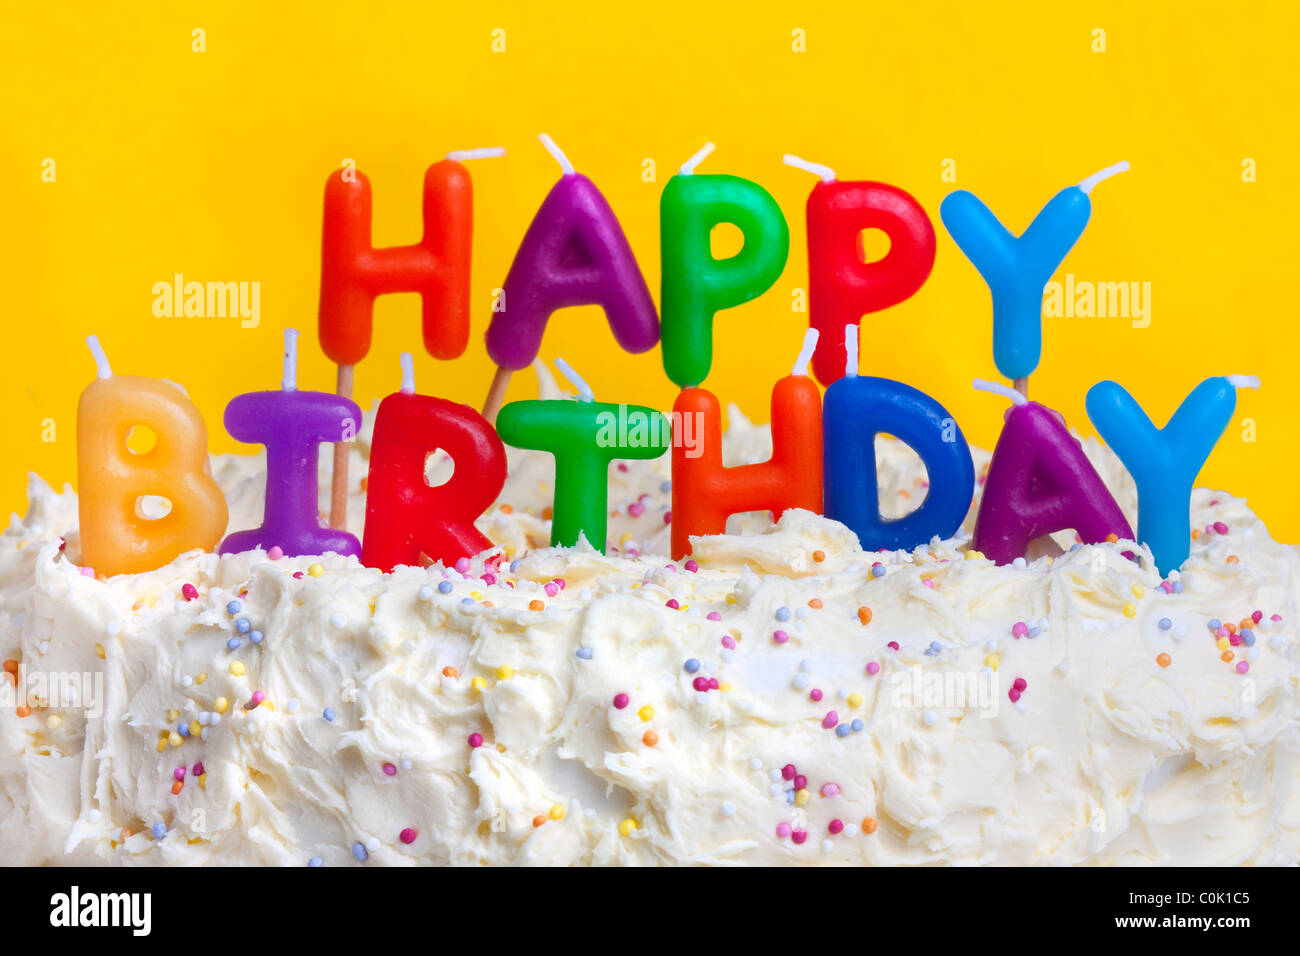 happy birthday cake shot on a yellow background with candles Stock Photo